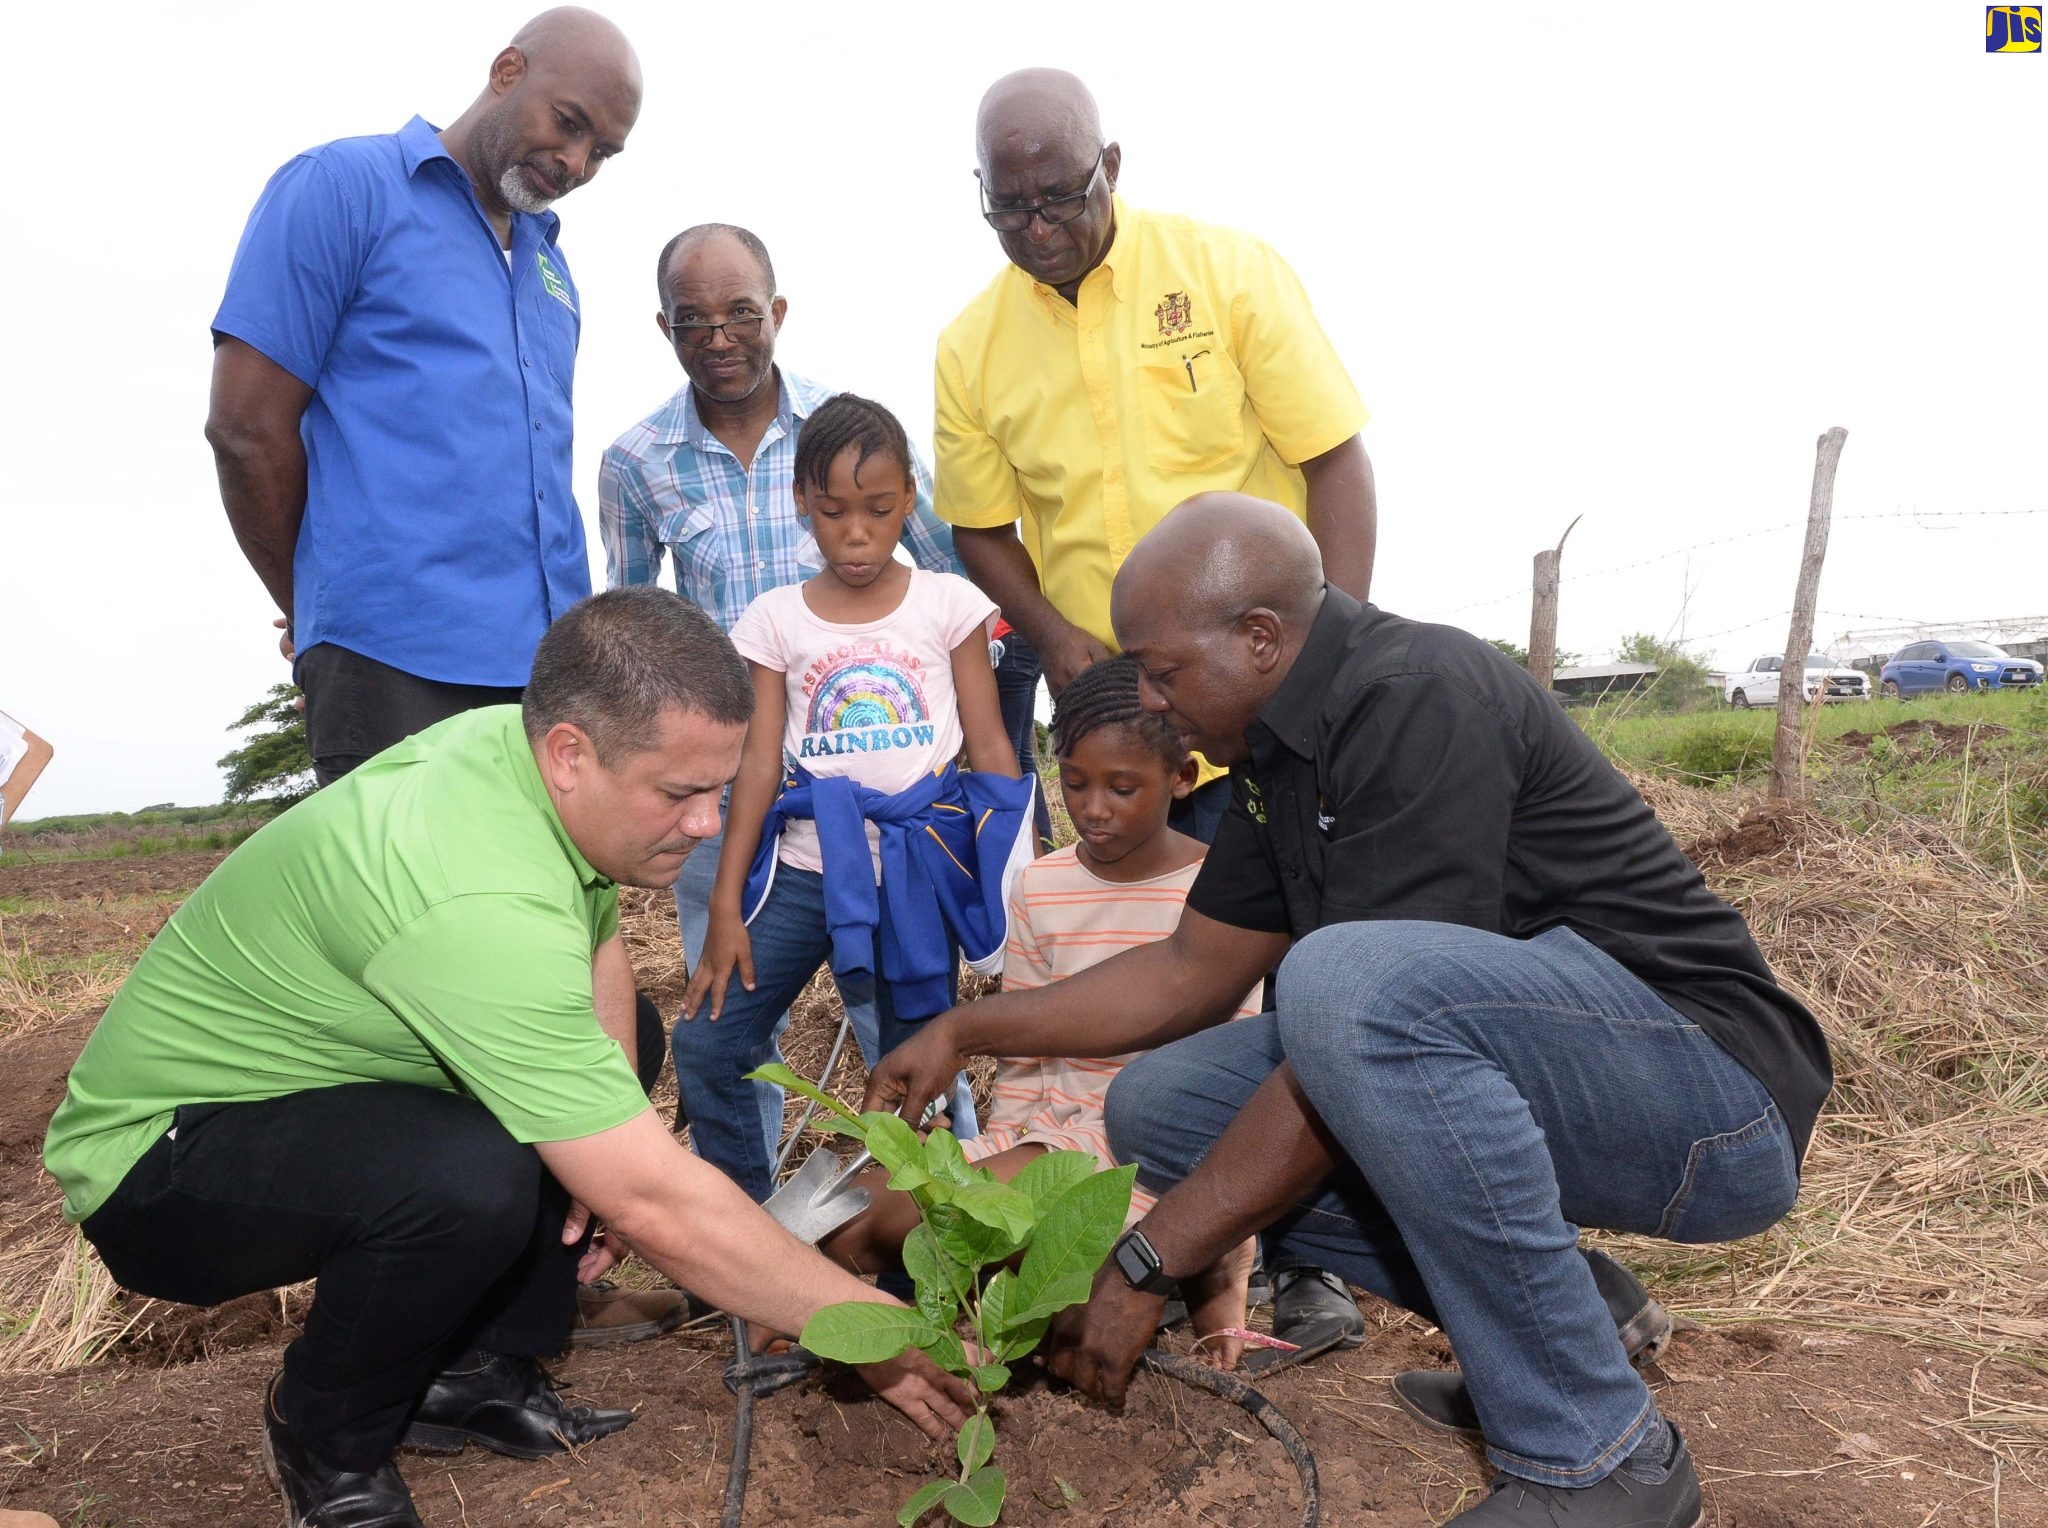 Minister without Portfolio in the Ministry of Economic Growth and Job Creation, Senator the Hon. Matthew Samuda (left), and Minister of Agriculture and Fisheries, Hon. Pearnel Charles Jr. (right), plant a tree at the Amity Hall Agro Park in St. Catherine, on August 31. It was the official launch of a multiagency partnership to plant 6,000 trees, in commemoration of Jamaica’s 60th Anniversary of Independence. Others pictured are (from left) Chief Executive Officer and Conservator of Forests, Ainsley A. Henry; Board member of the Agro Investment Corporation, Errol Green; Orville Palmer, and two children of a farmer in the area.